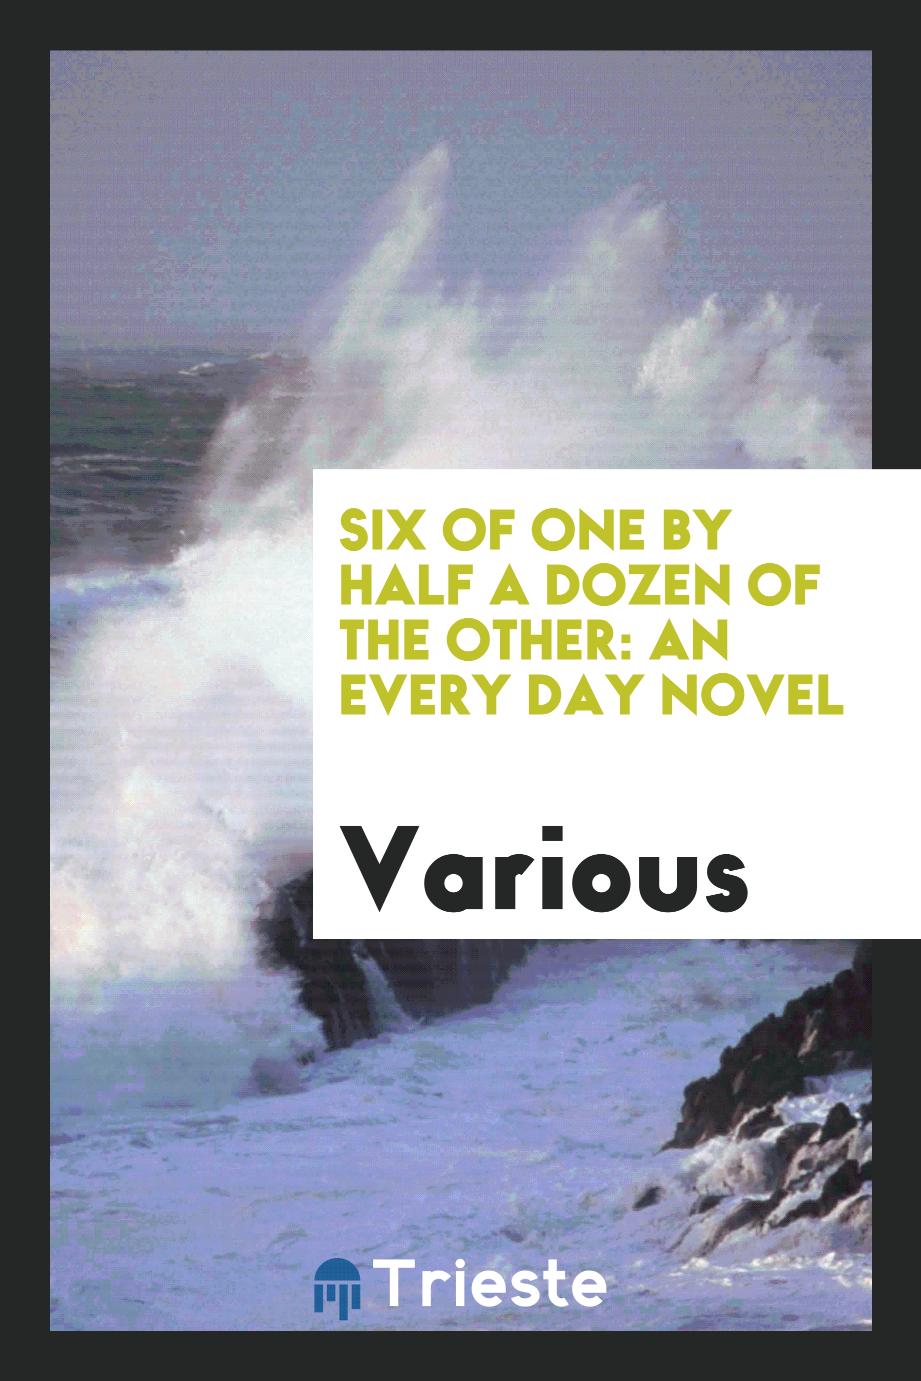 Six of one by half a dozen of the other: an every day novel